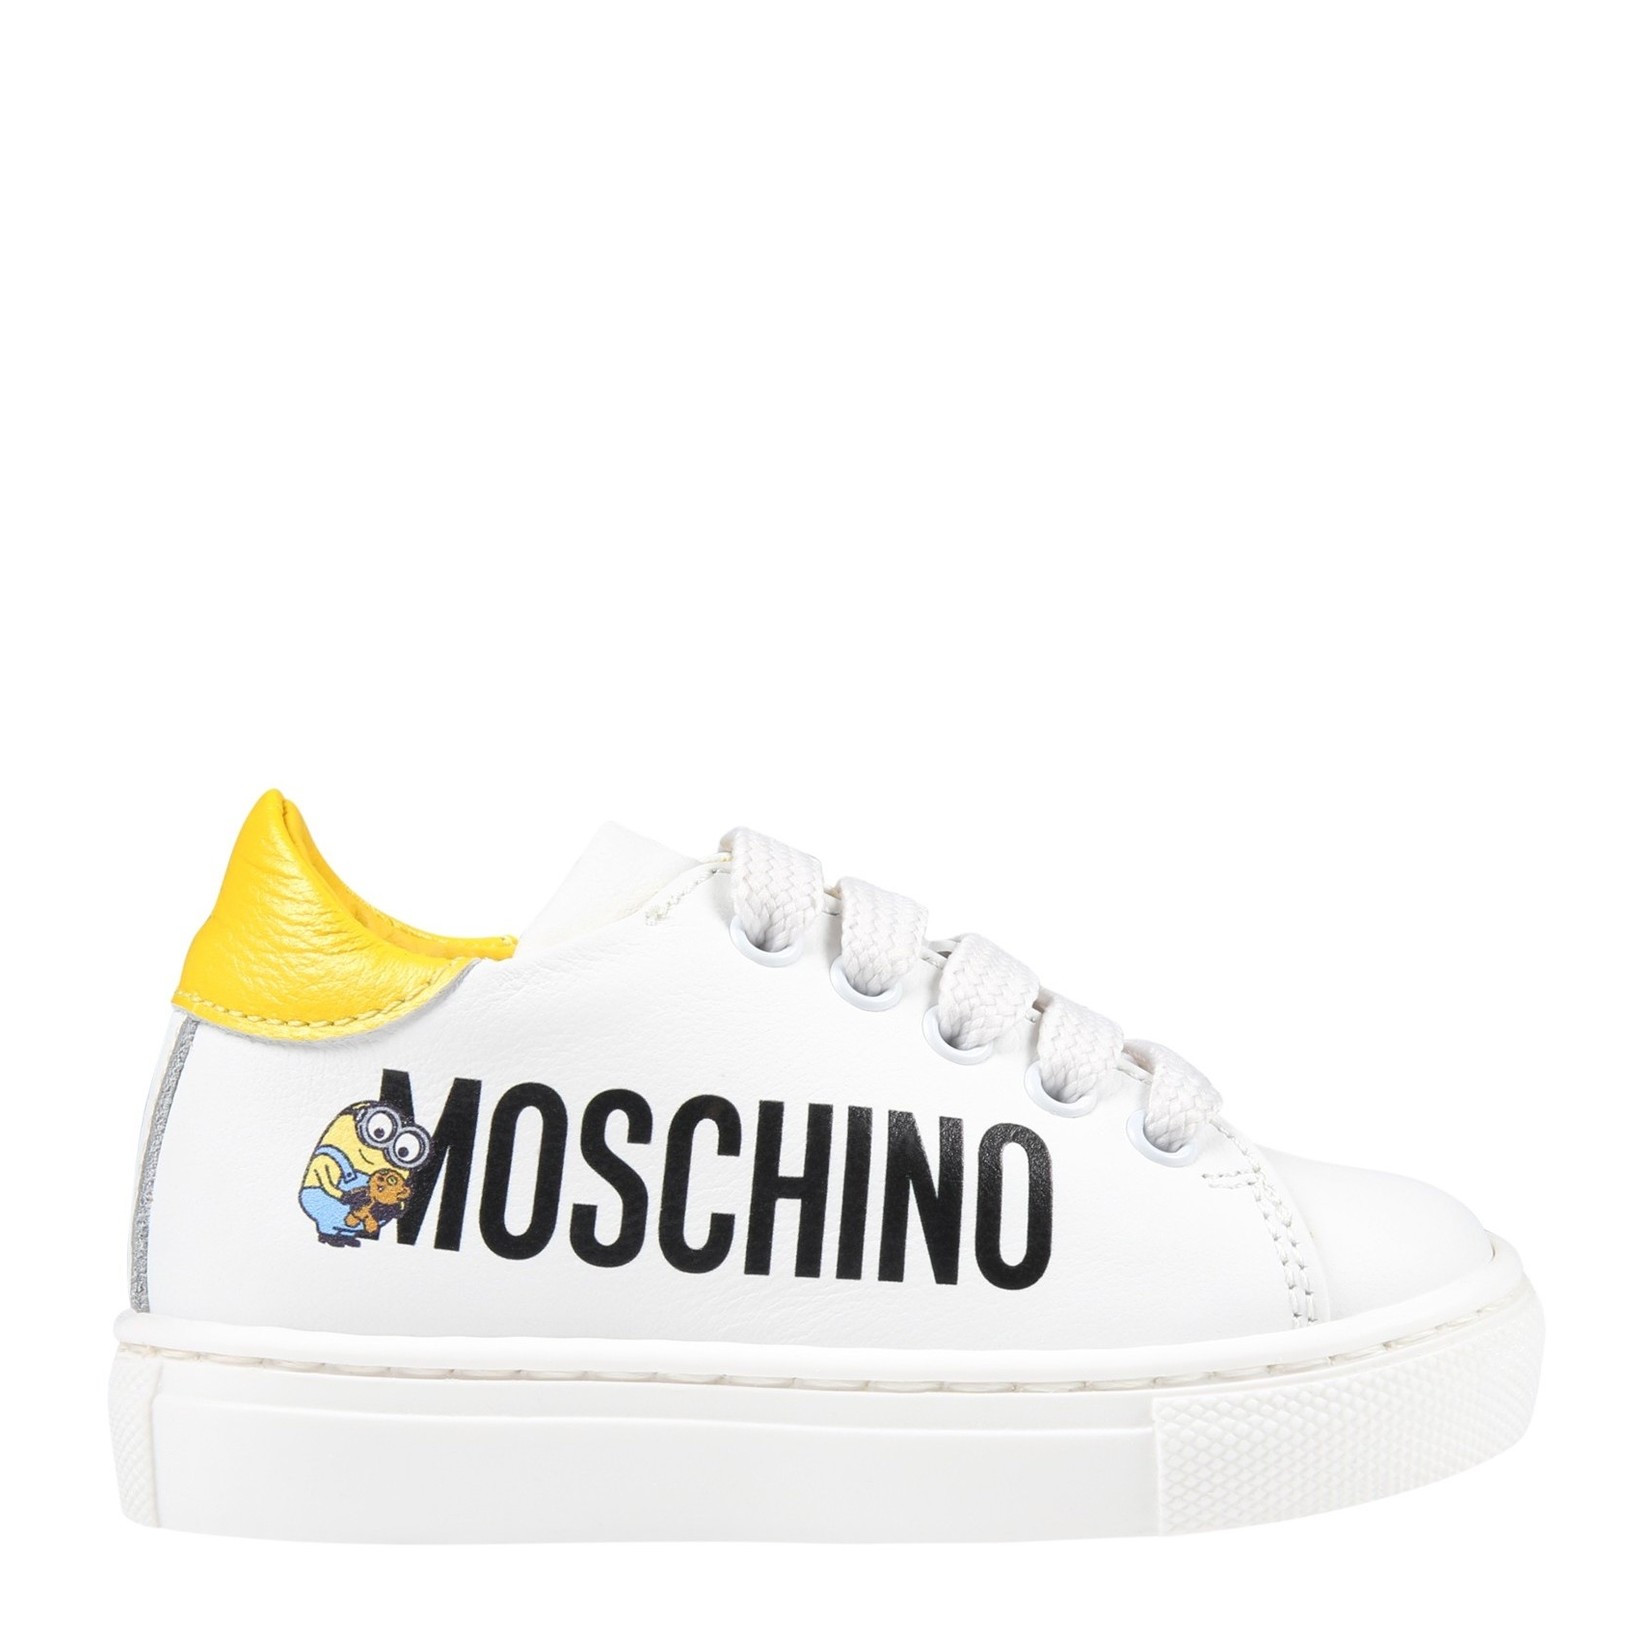 Moschino Moschino - White sneakers for kids with Minions and black logo